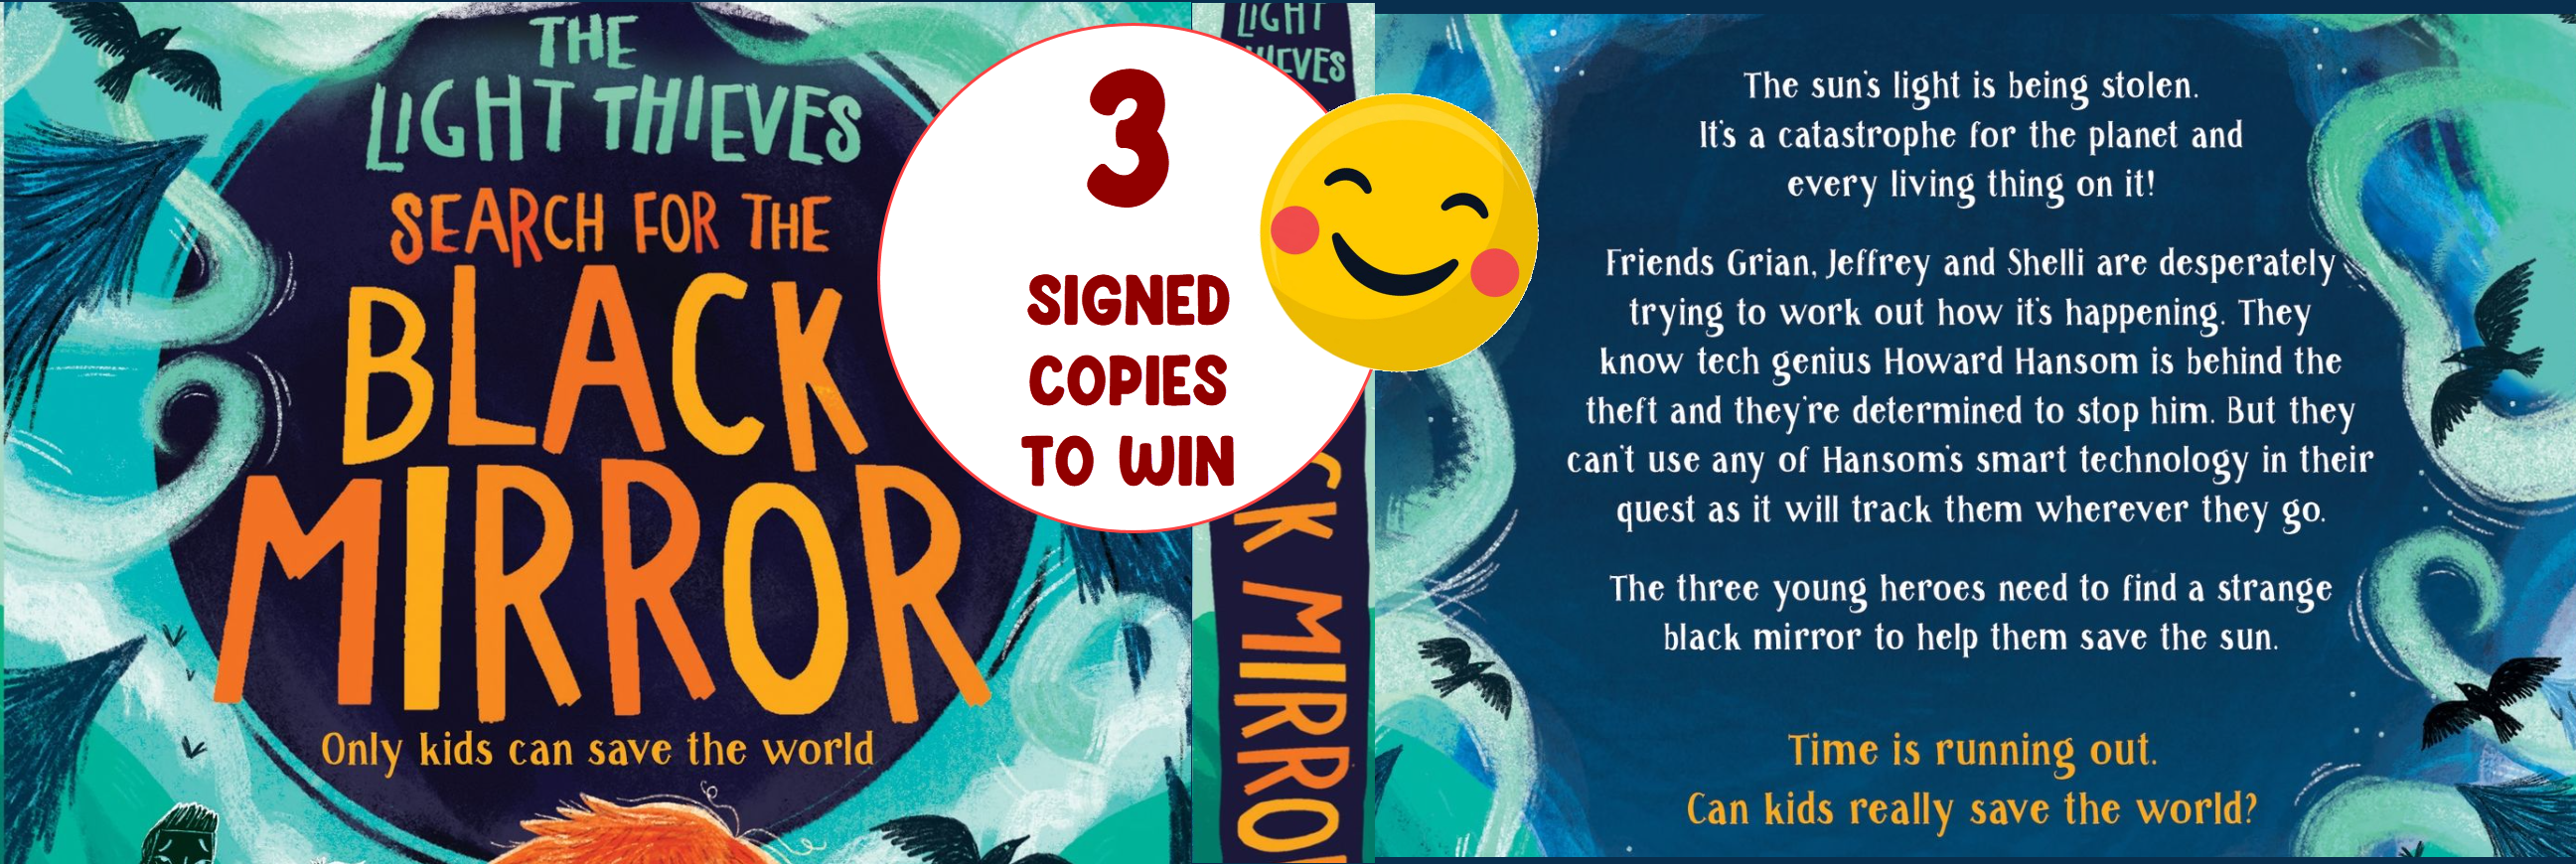 WIN a *The Light Thieves: Search for the Black Mirror* (SIGNED!) 